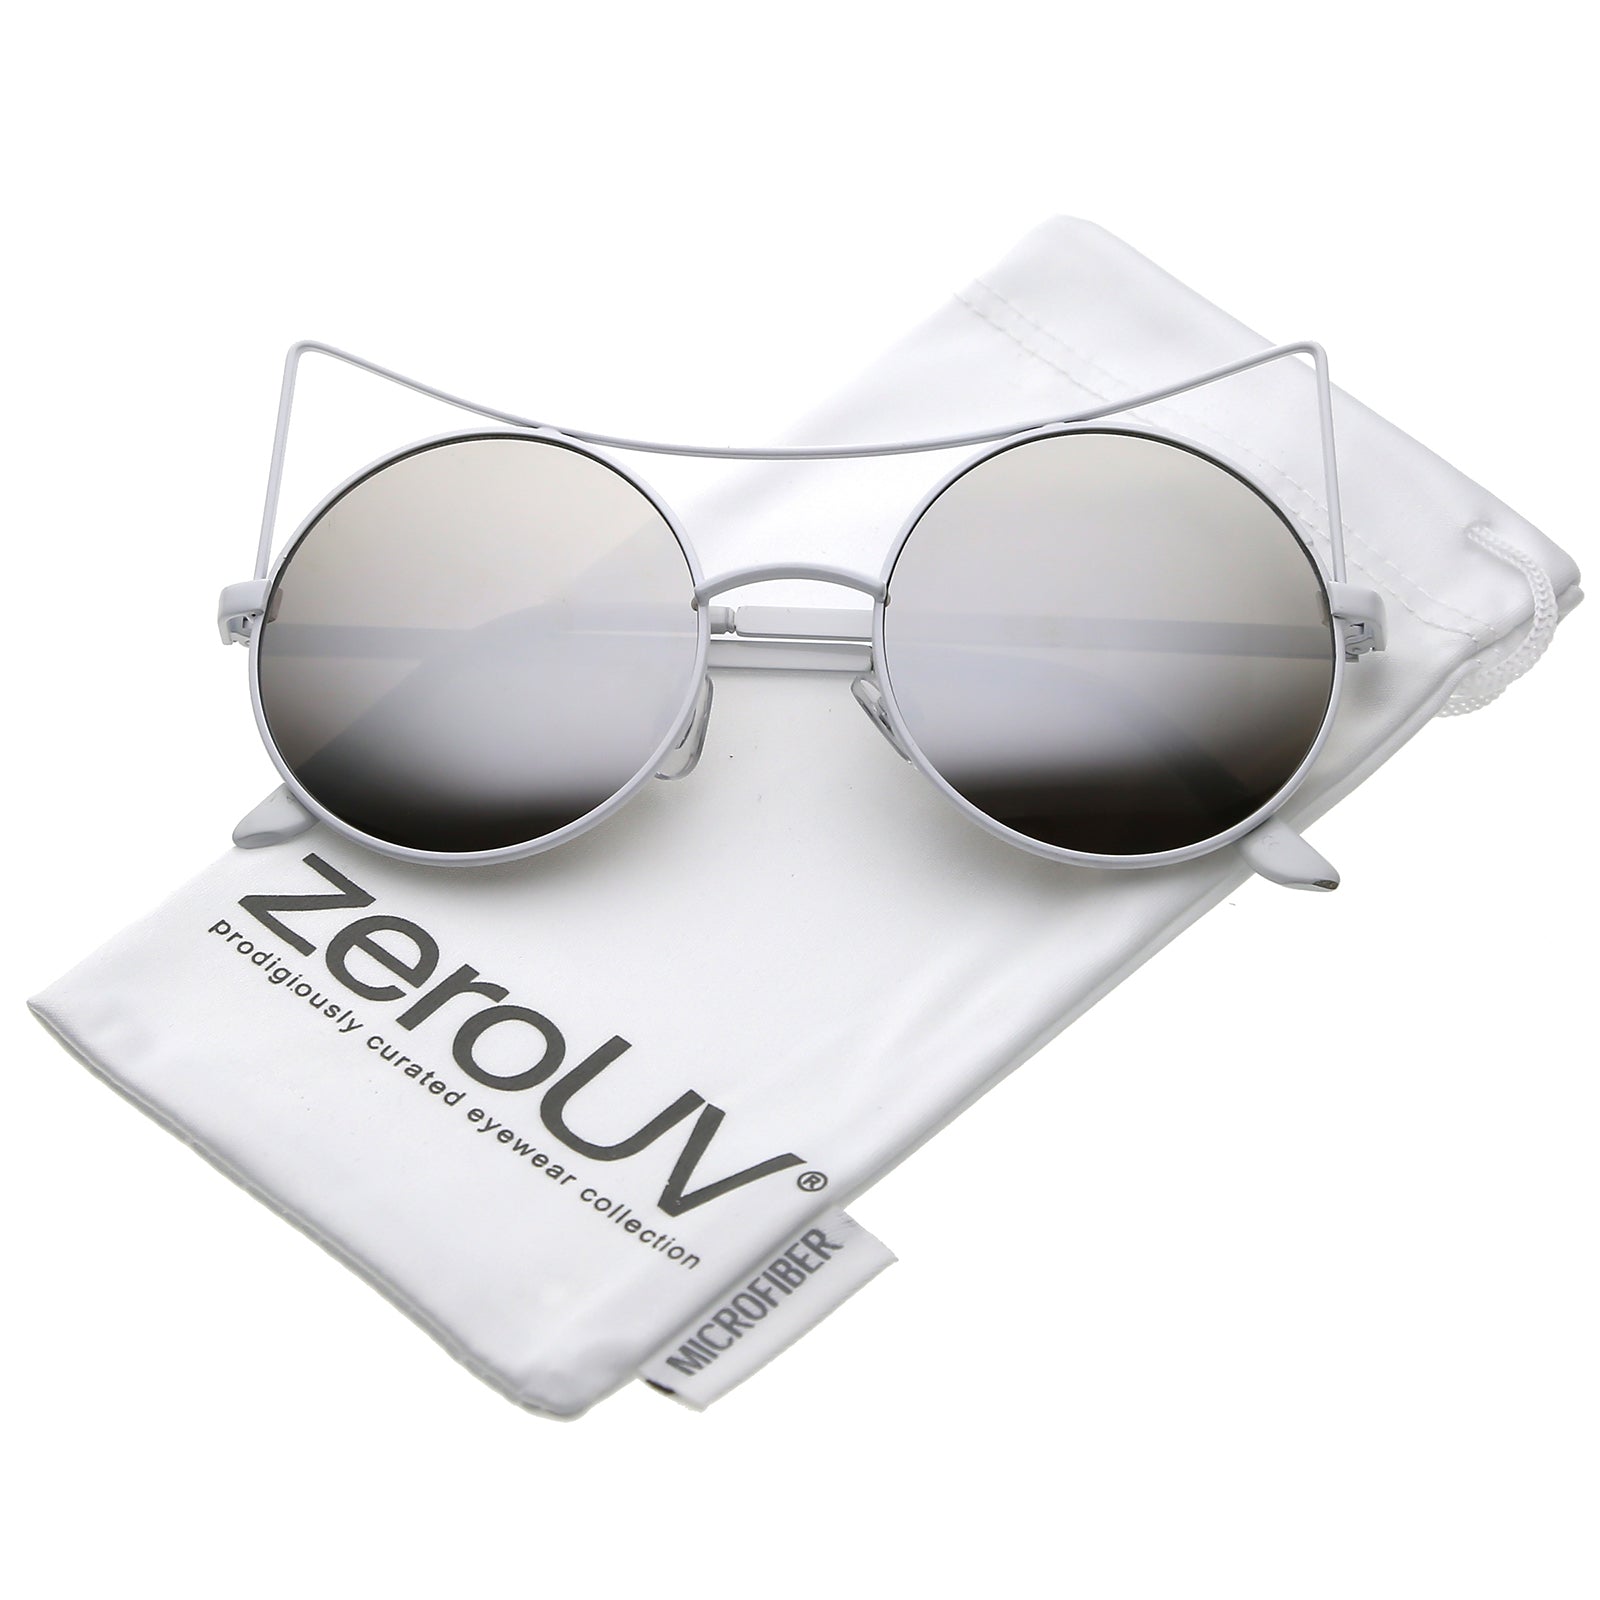 zeroUV - Oversize Metal Frame Thin Temple Color Mirror Flat Lens Aviator Sunglasses 62mm (Silver / Silver Mirror)